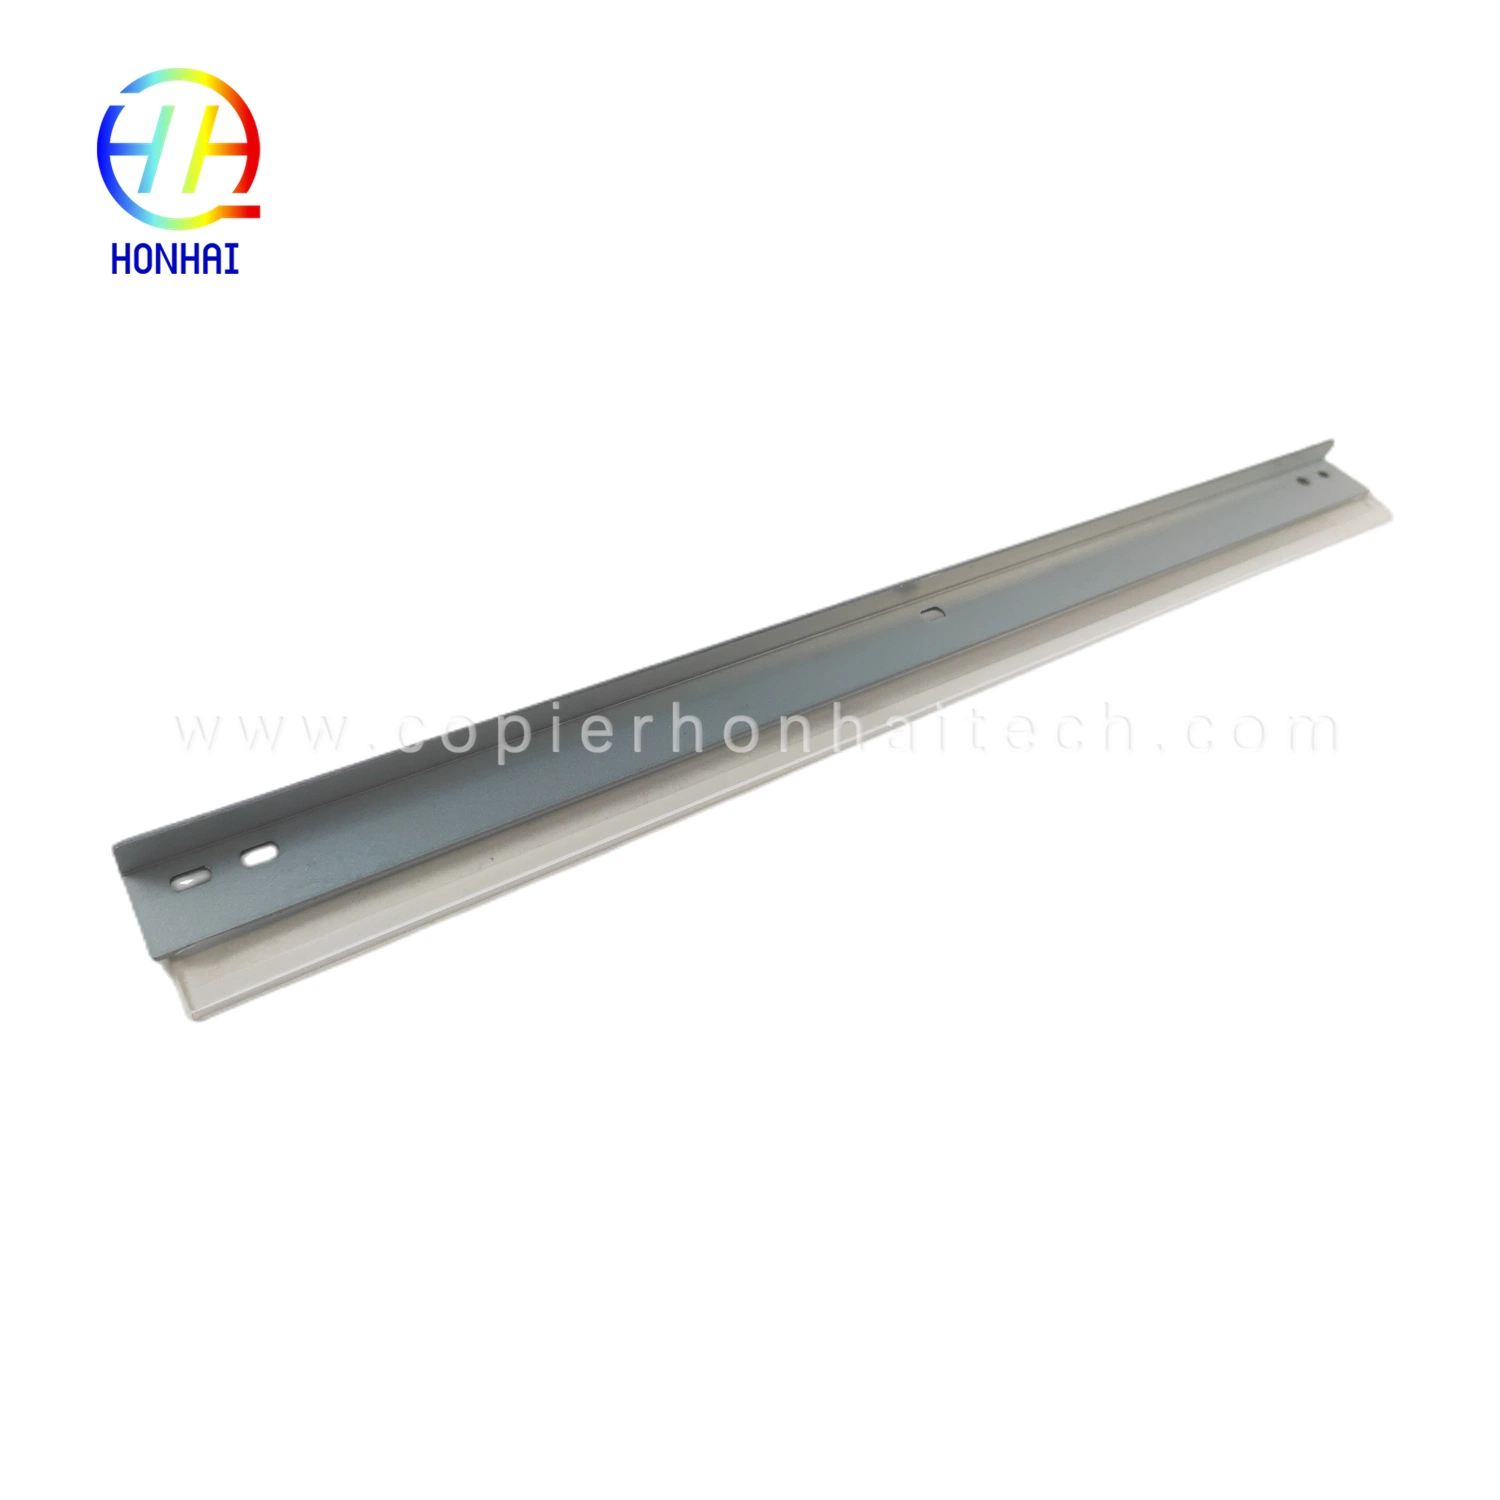 Drum Cleaning Blade for Ricoh MP 2553 3053 3353 Aficio 1022 1027 1032 2022 2027 3025 3030 MP 2510 2550 2851 2852 3010 3350 3352 (AD04-2083)